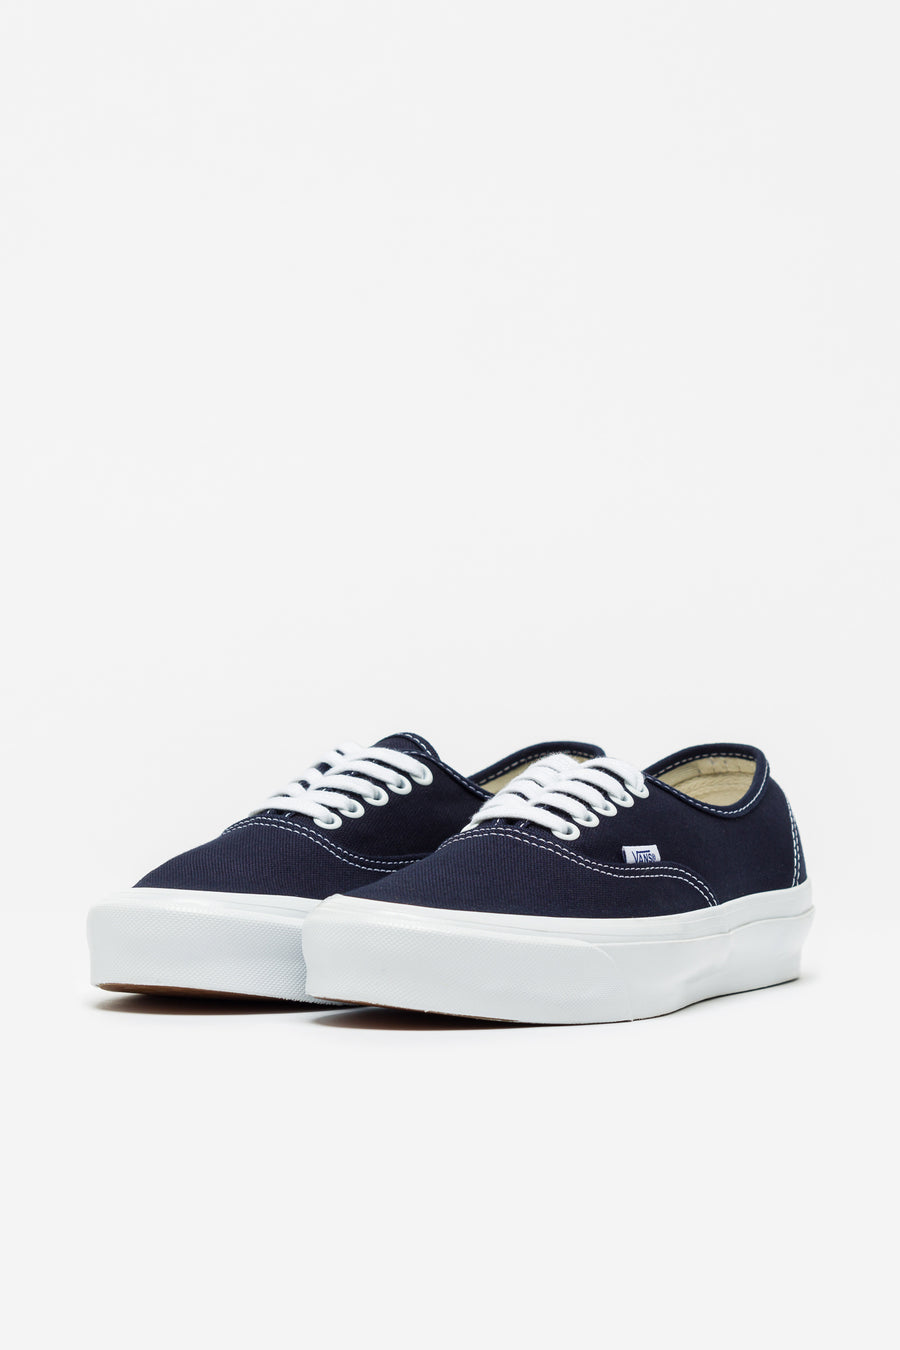 Authentic LX in Navy